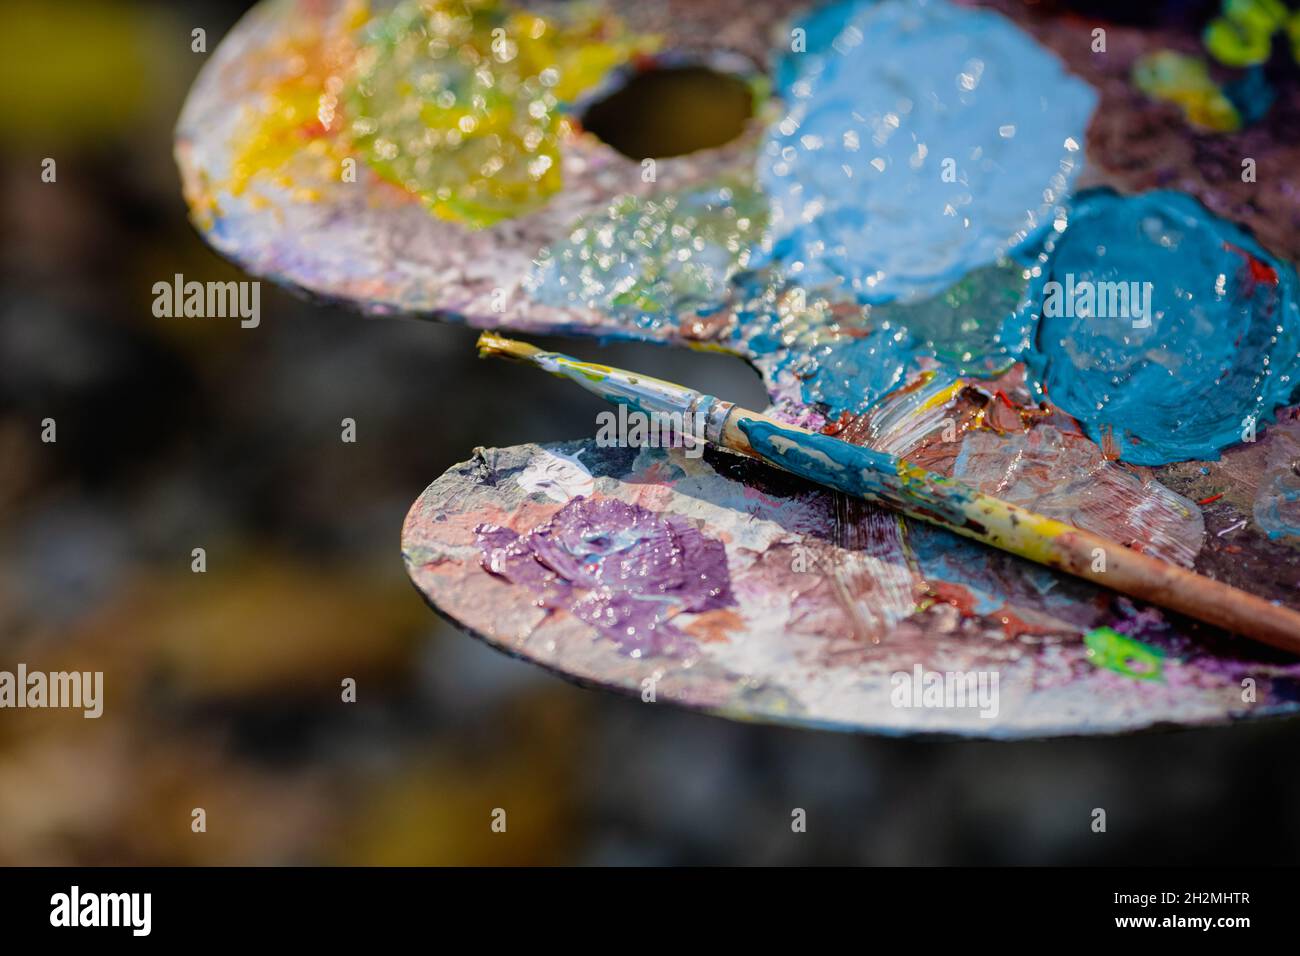 Vibrant multi-coloured artists oil paint palette. Shallow depth of field  Stock Photo - Alamy